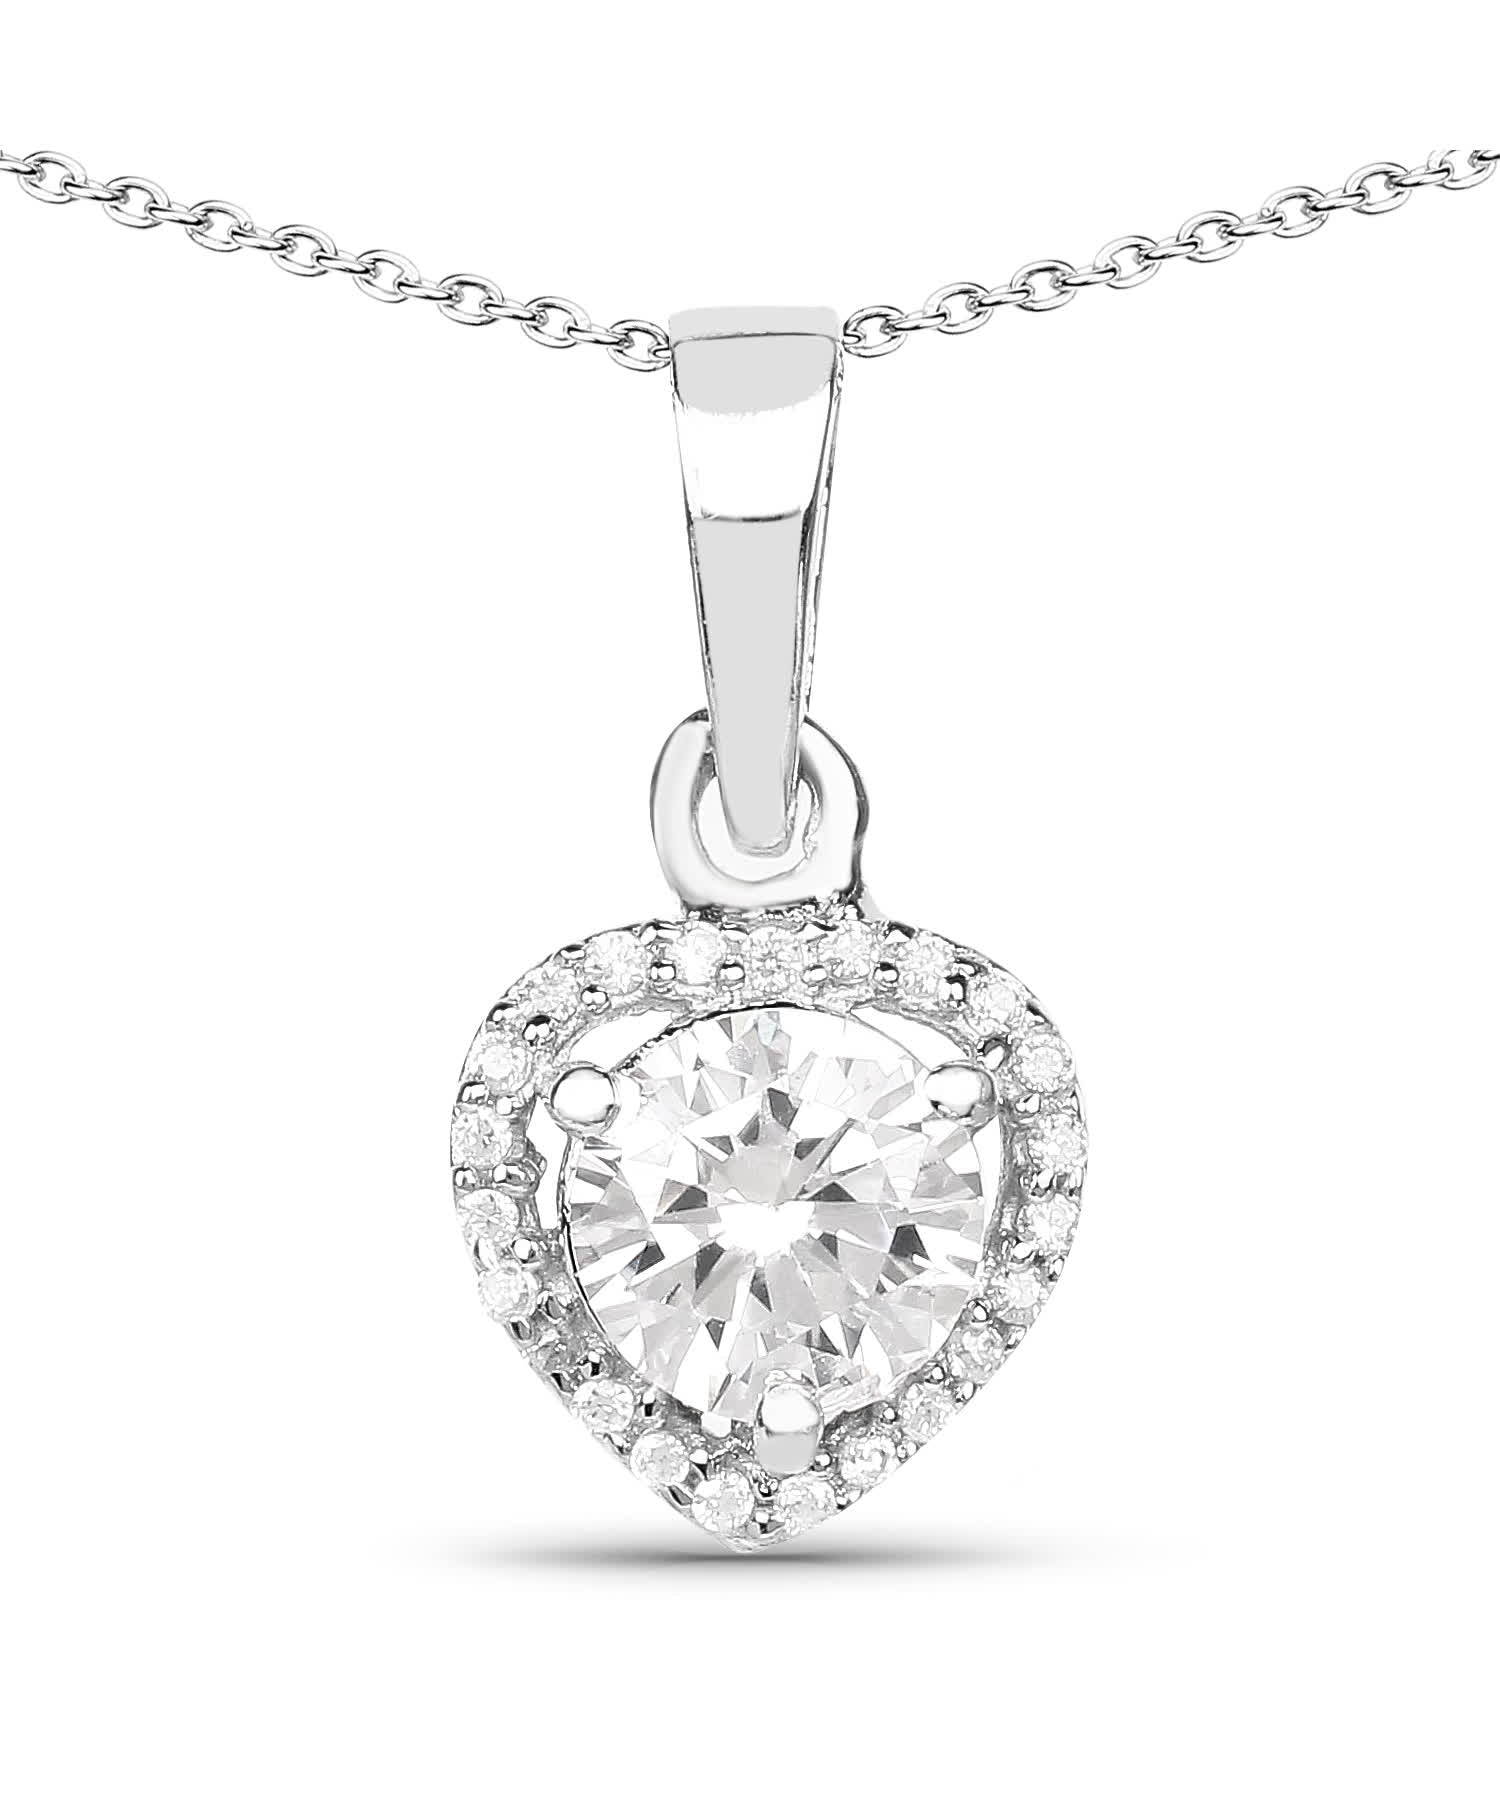 Created Cubic Zirconia Rhodium Plated 925 Sterling Silver Heart Pendant With Chain View 1